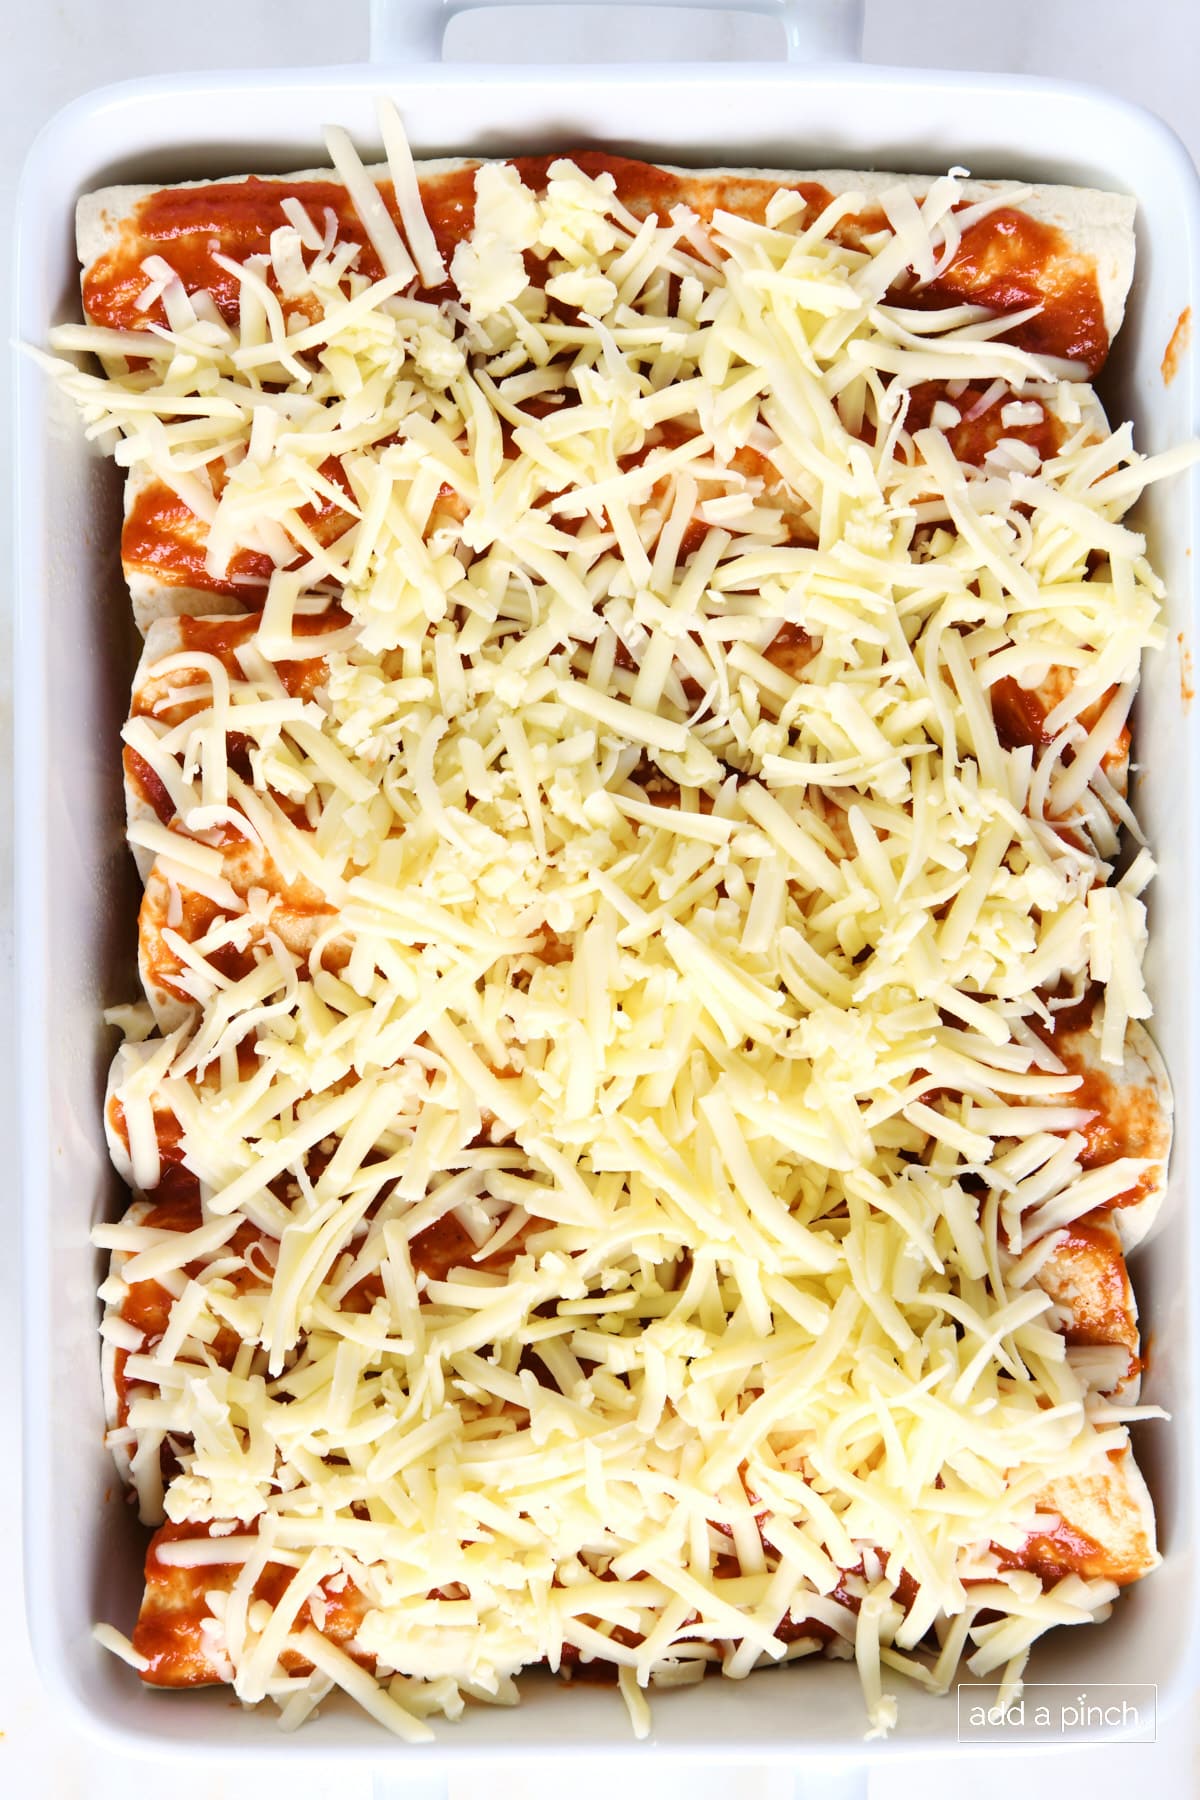 Chicken enchiladas topped with enchilada sauce and shredded cheese ready to be baked.